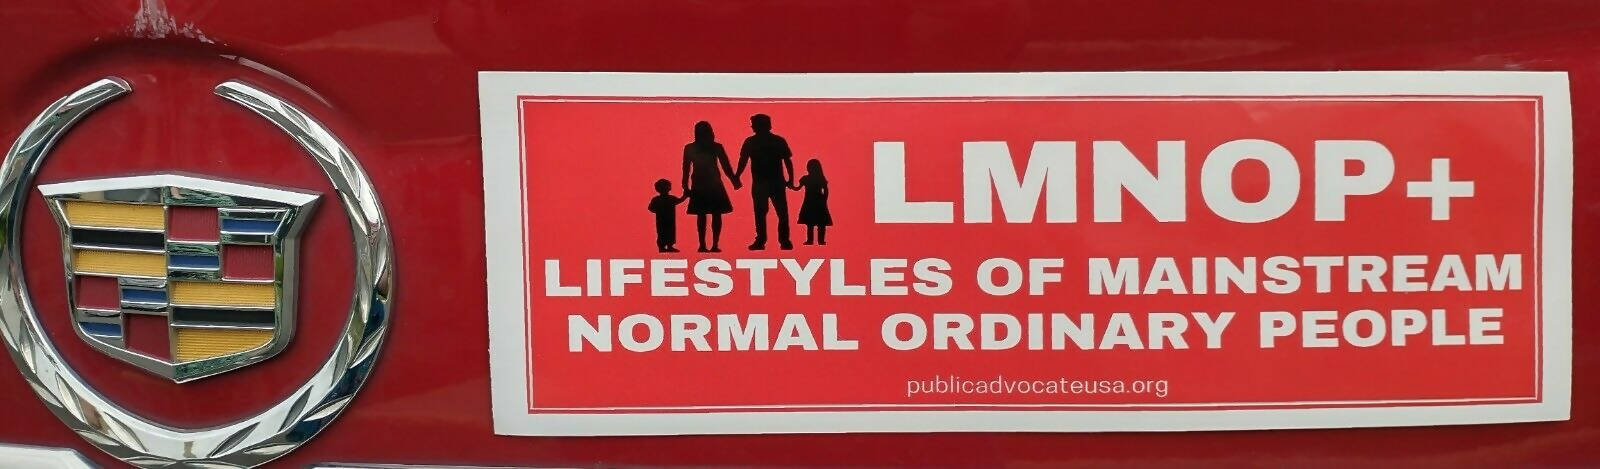 Lifestyle of Mainstream Normal Ordinary People Bumper Sticker (4X11 in)